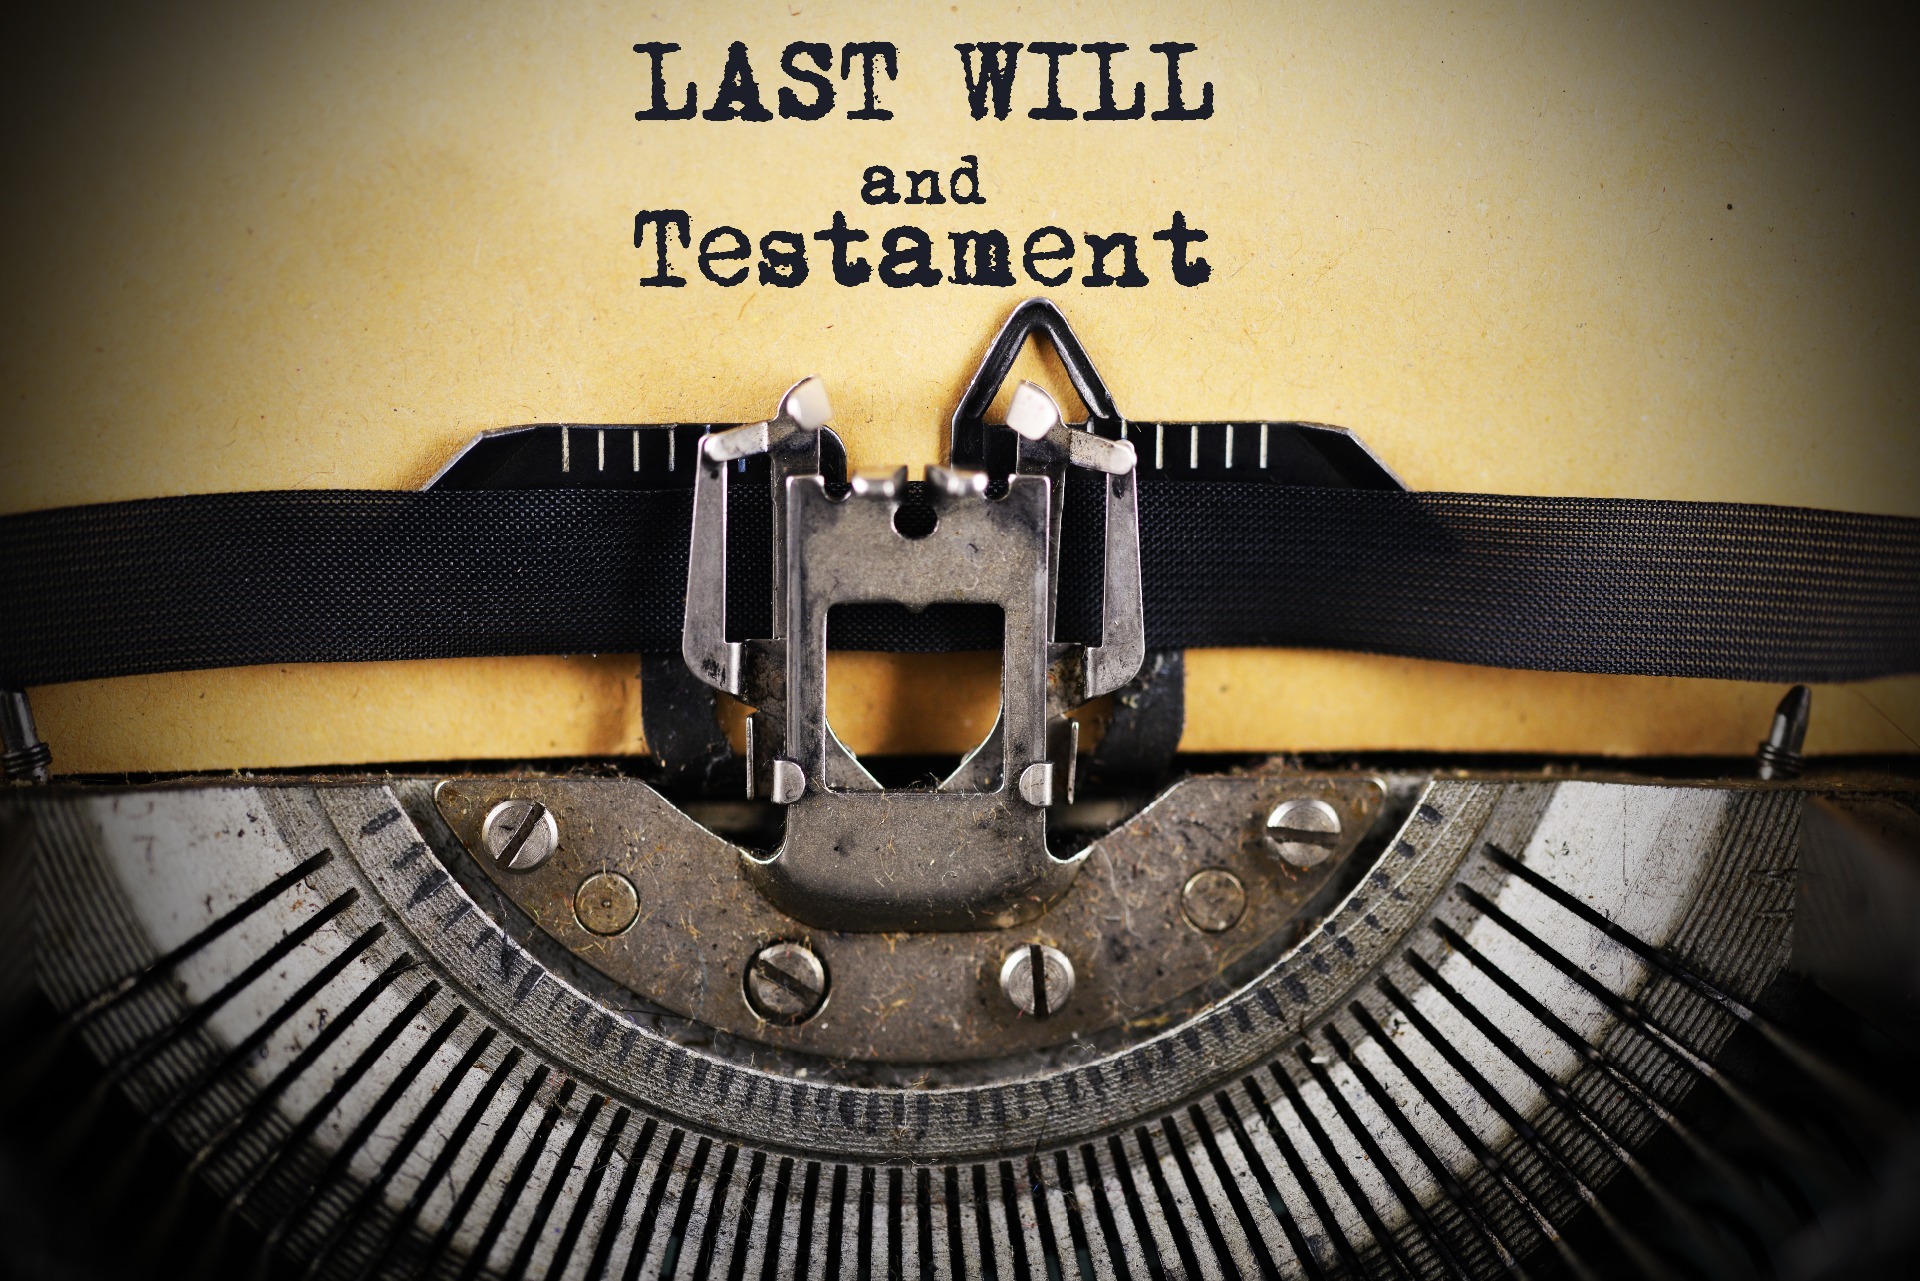 "Last Will and Testament" on a typewriter; our Wills Solicittors in Lytham discuss issues with Wills.